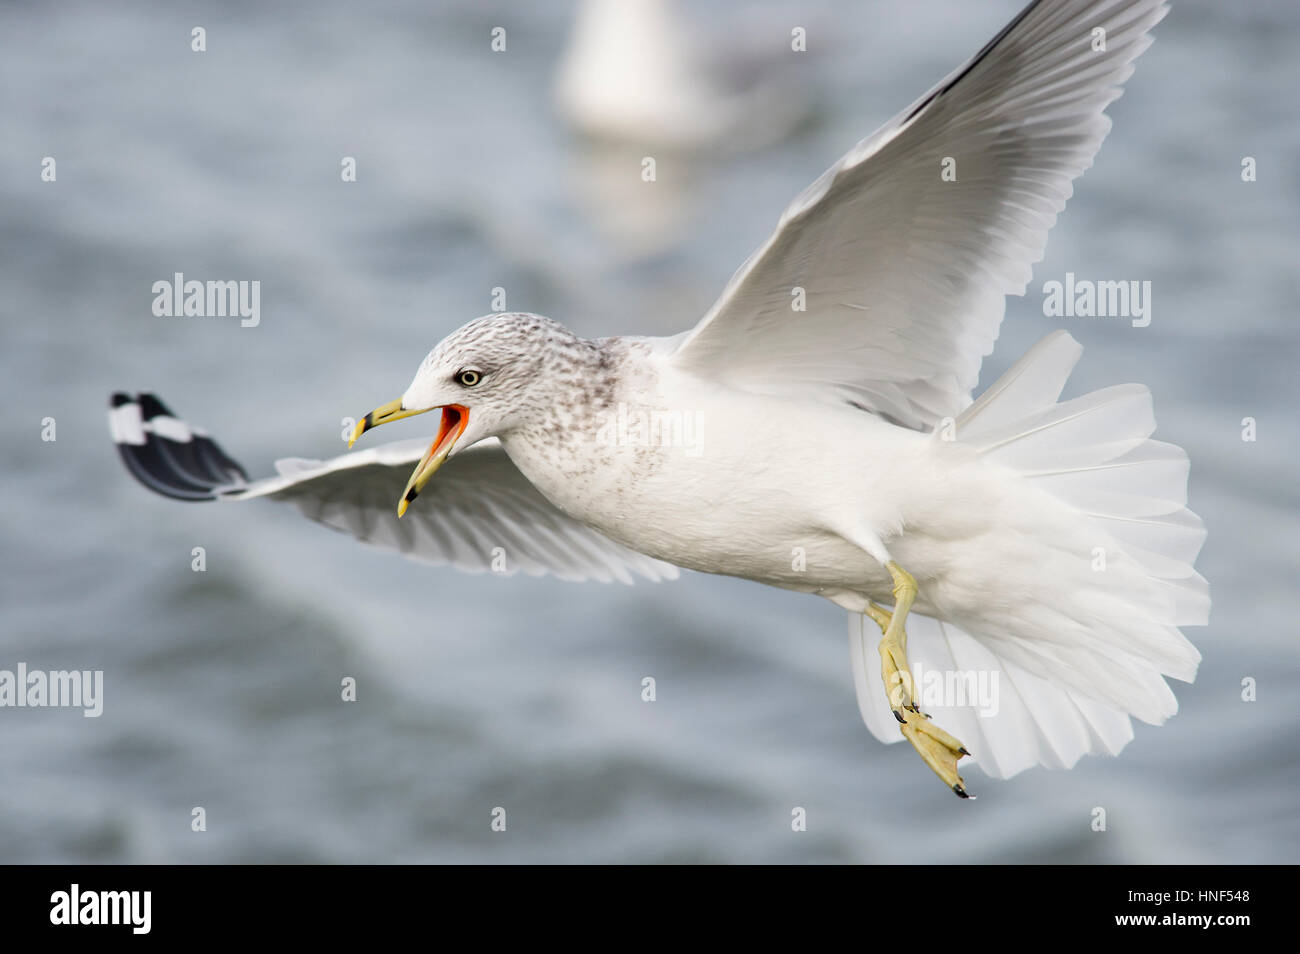 A Ring-billed Gull calls out loudly as it flies around in soft overcast light with a smooth background. Stock Photo